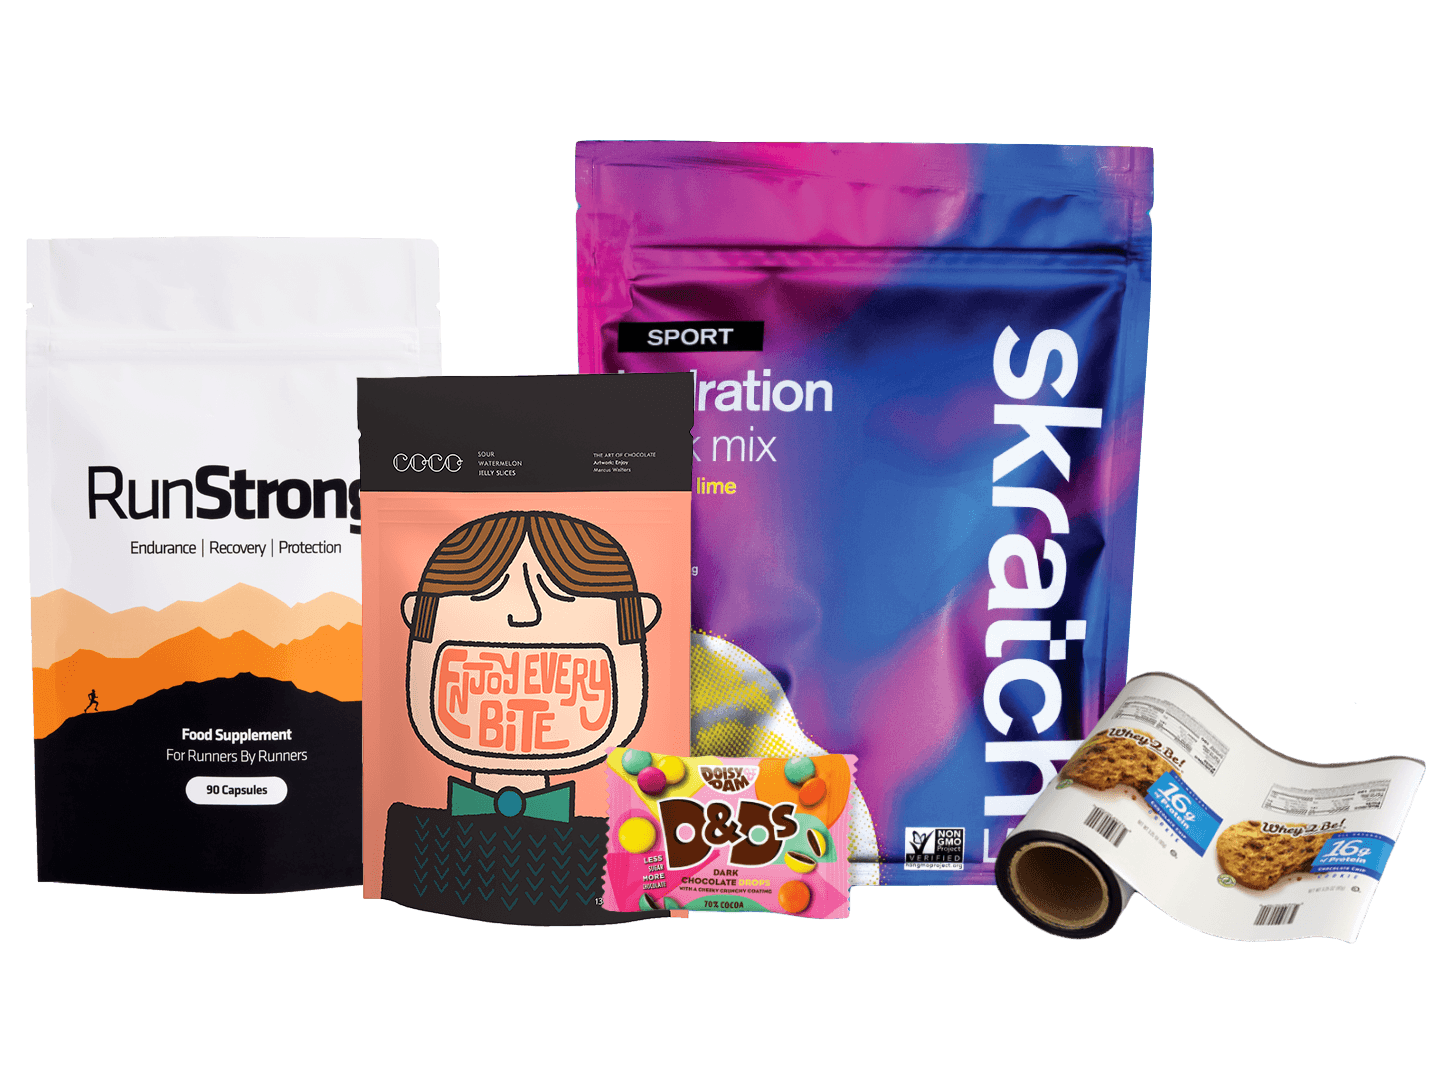 doypack, sachet doypack, emballage souple imprime, sachet kraft, sachet alimentaire, doypack imprime, emballage alimentaire